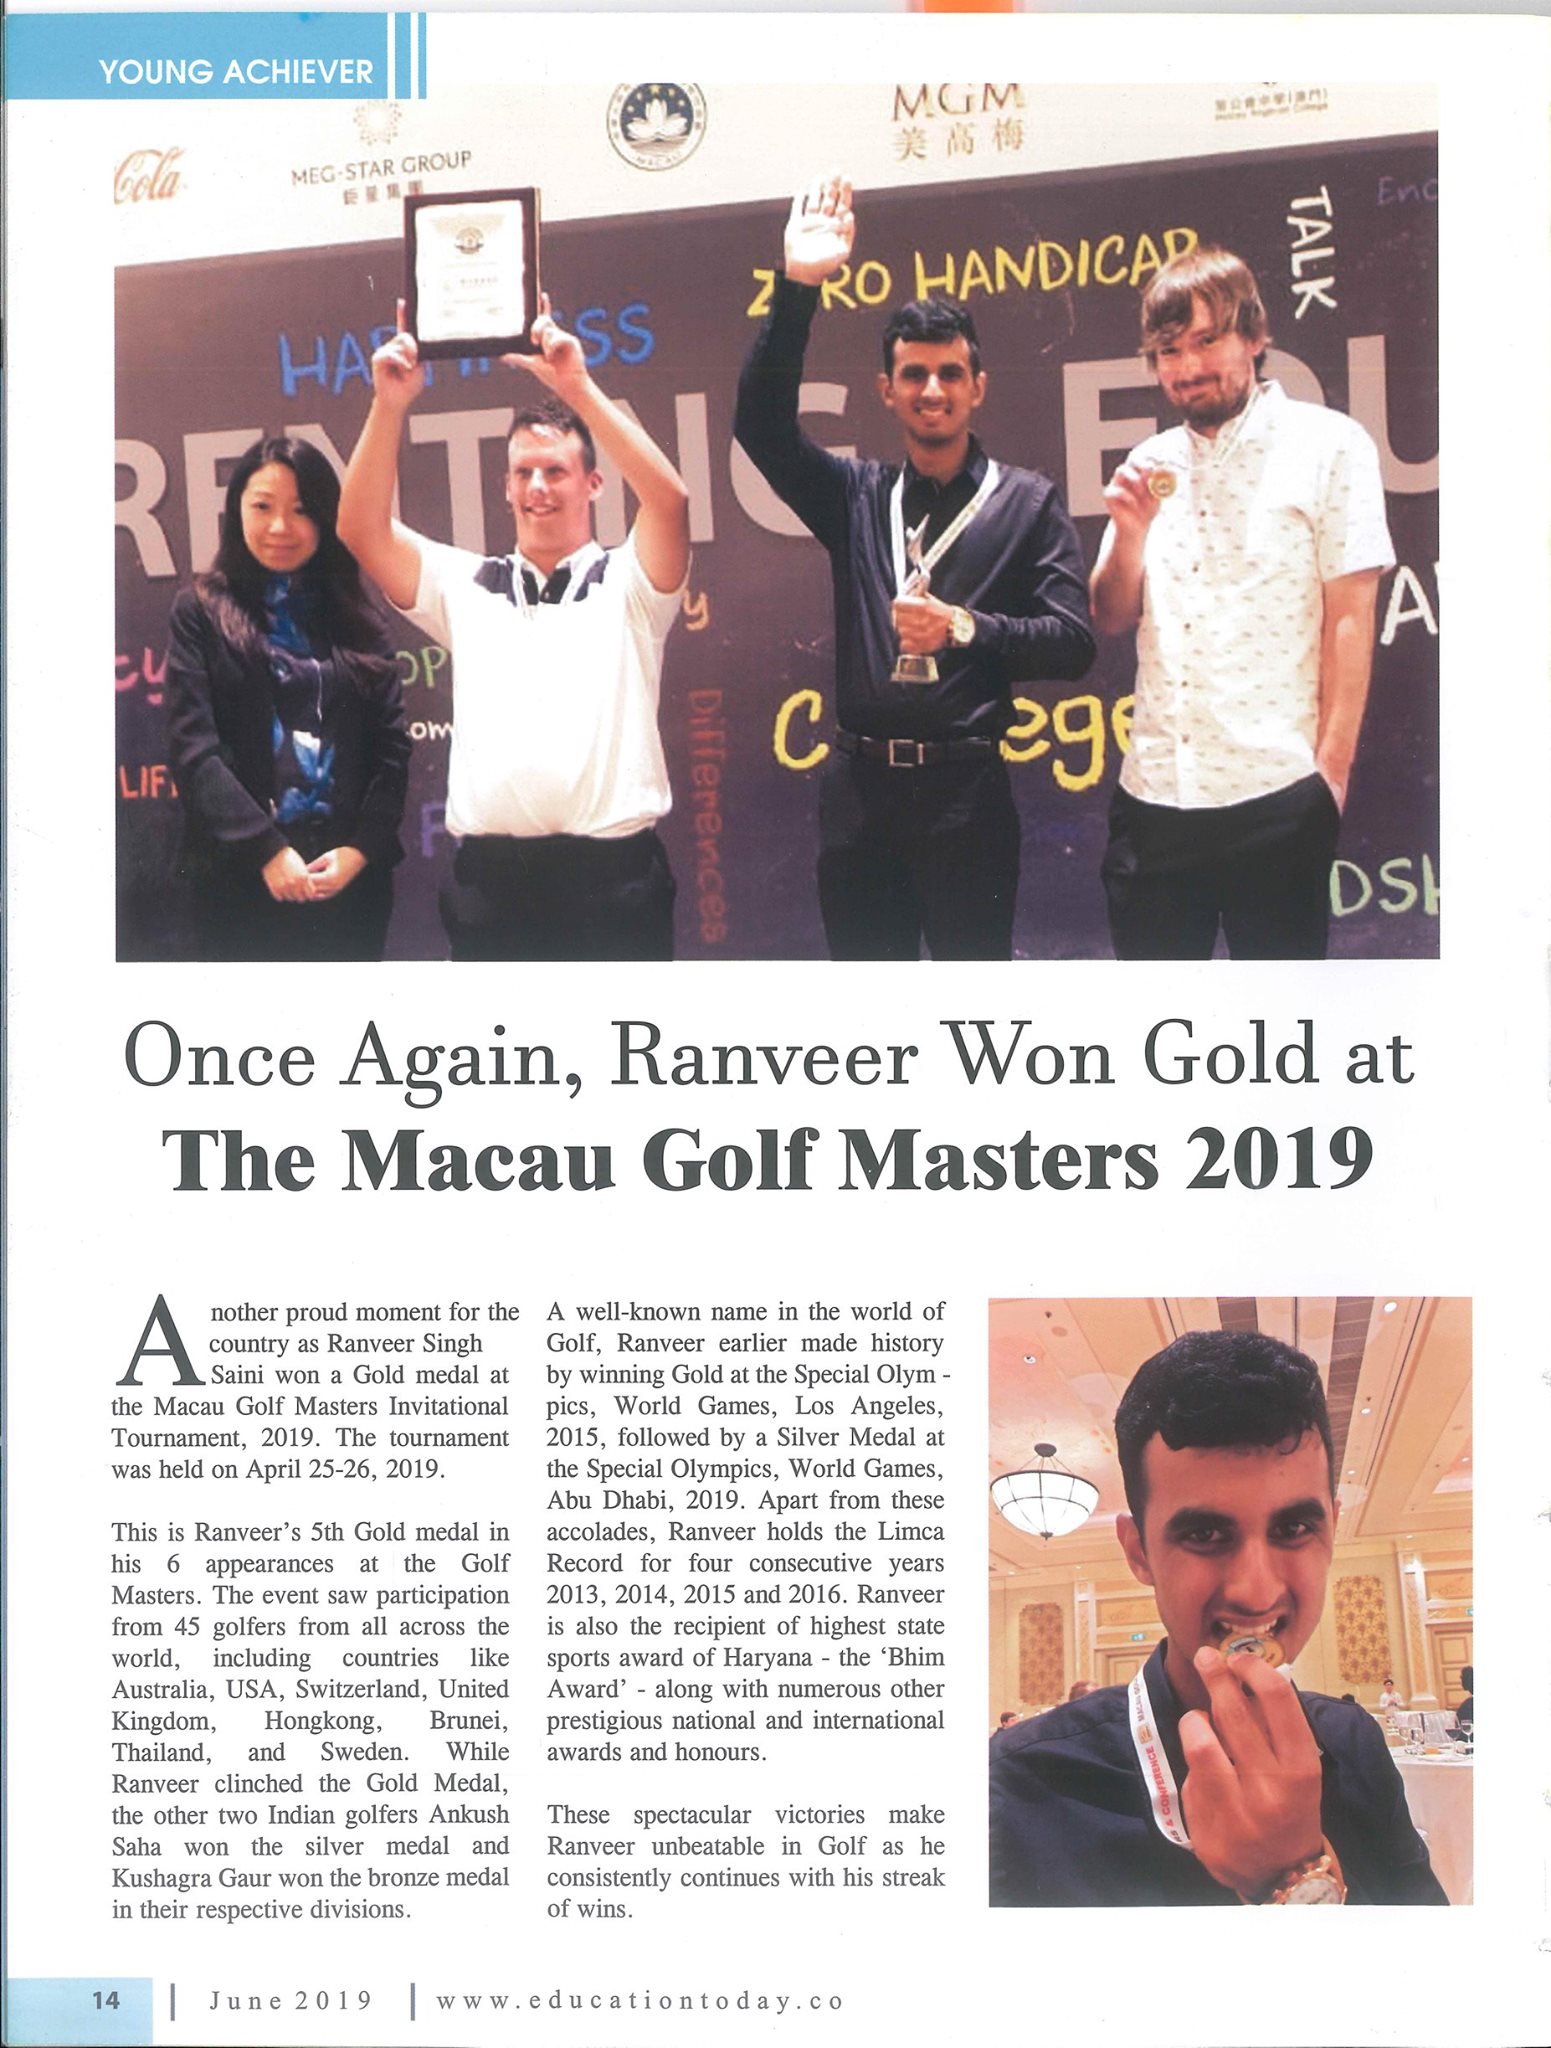 Ranveer Saini featured in “Education Today” as the YOUNG ACHIEVER -June 2019 Edition